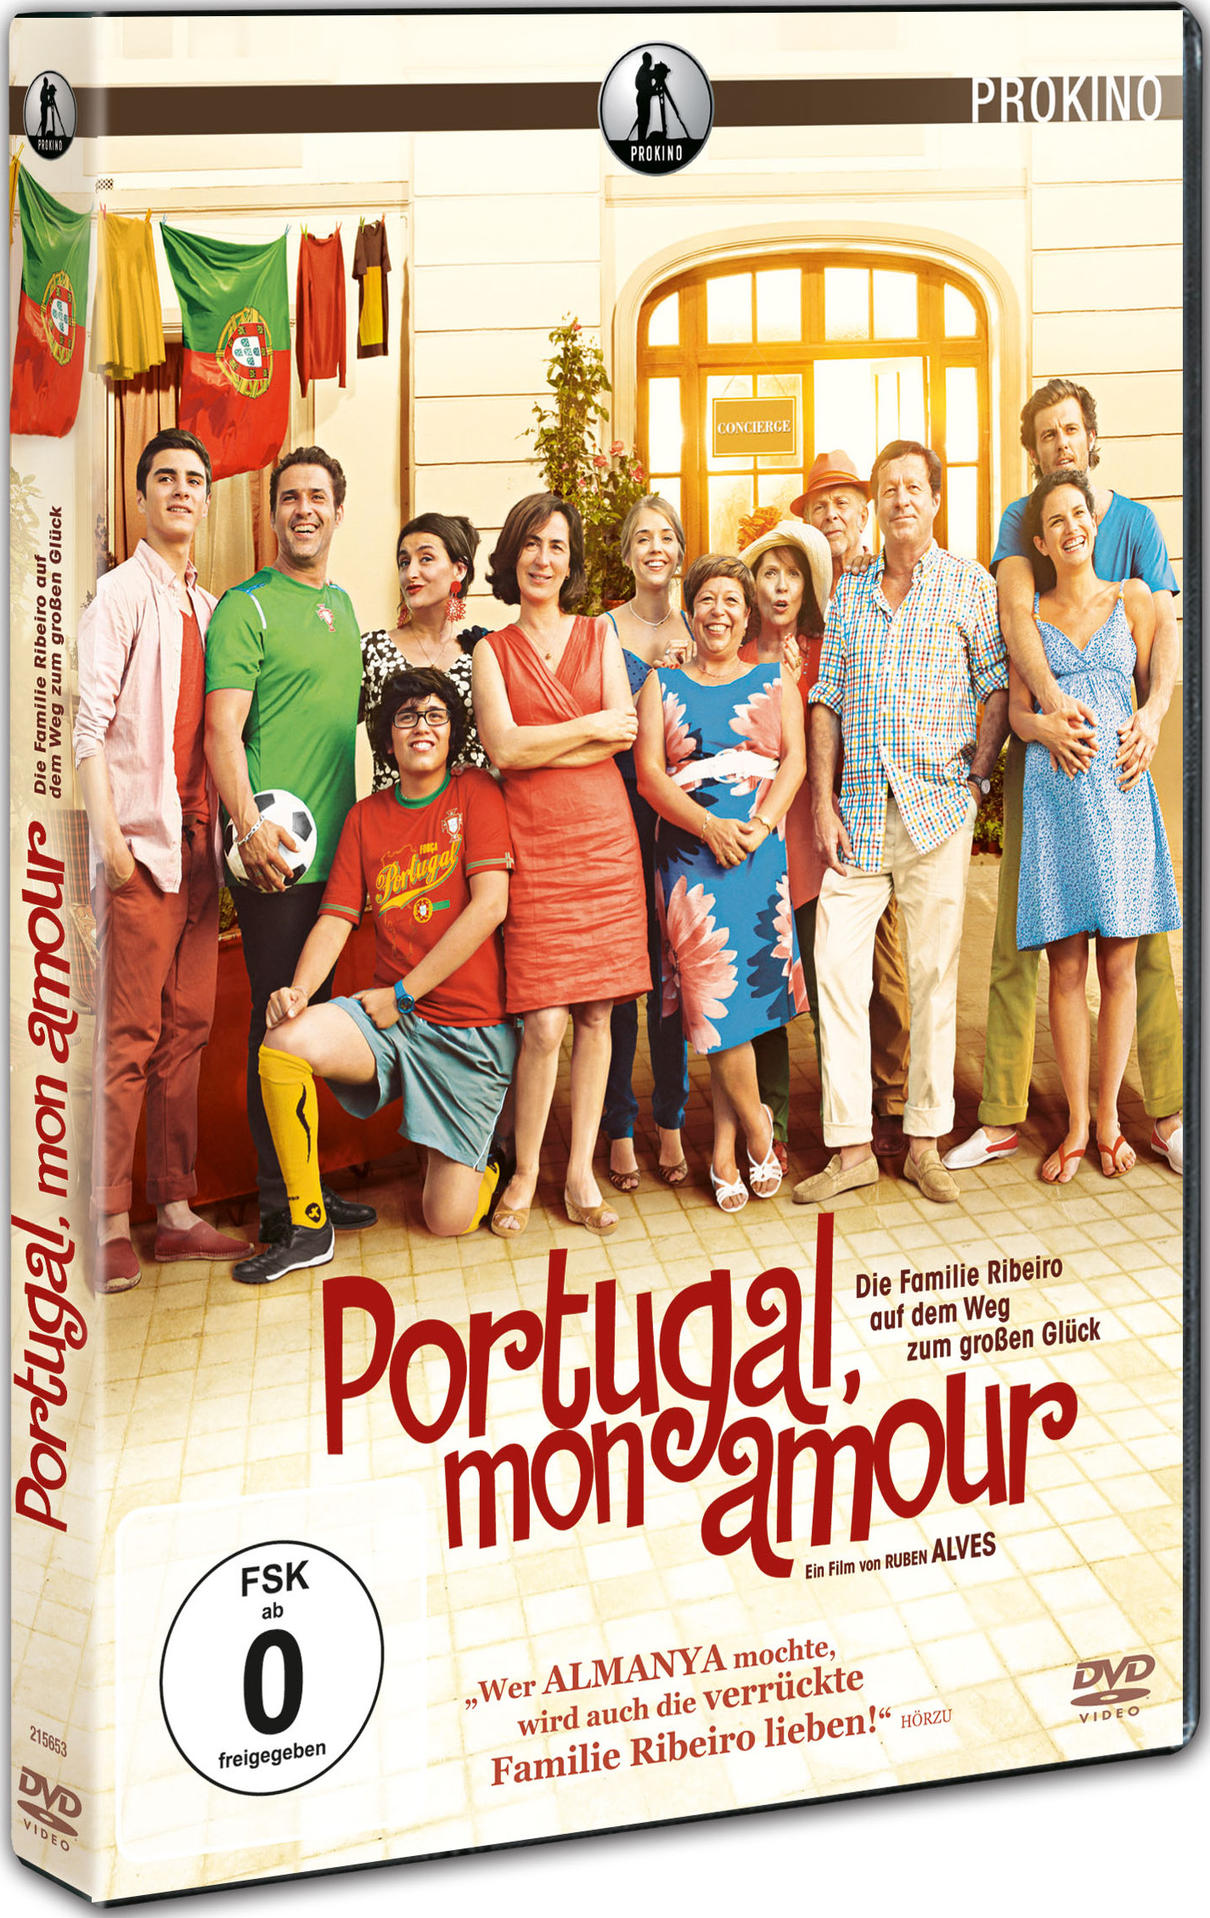 Portugal, mon DVD amour